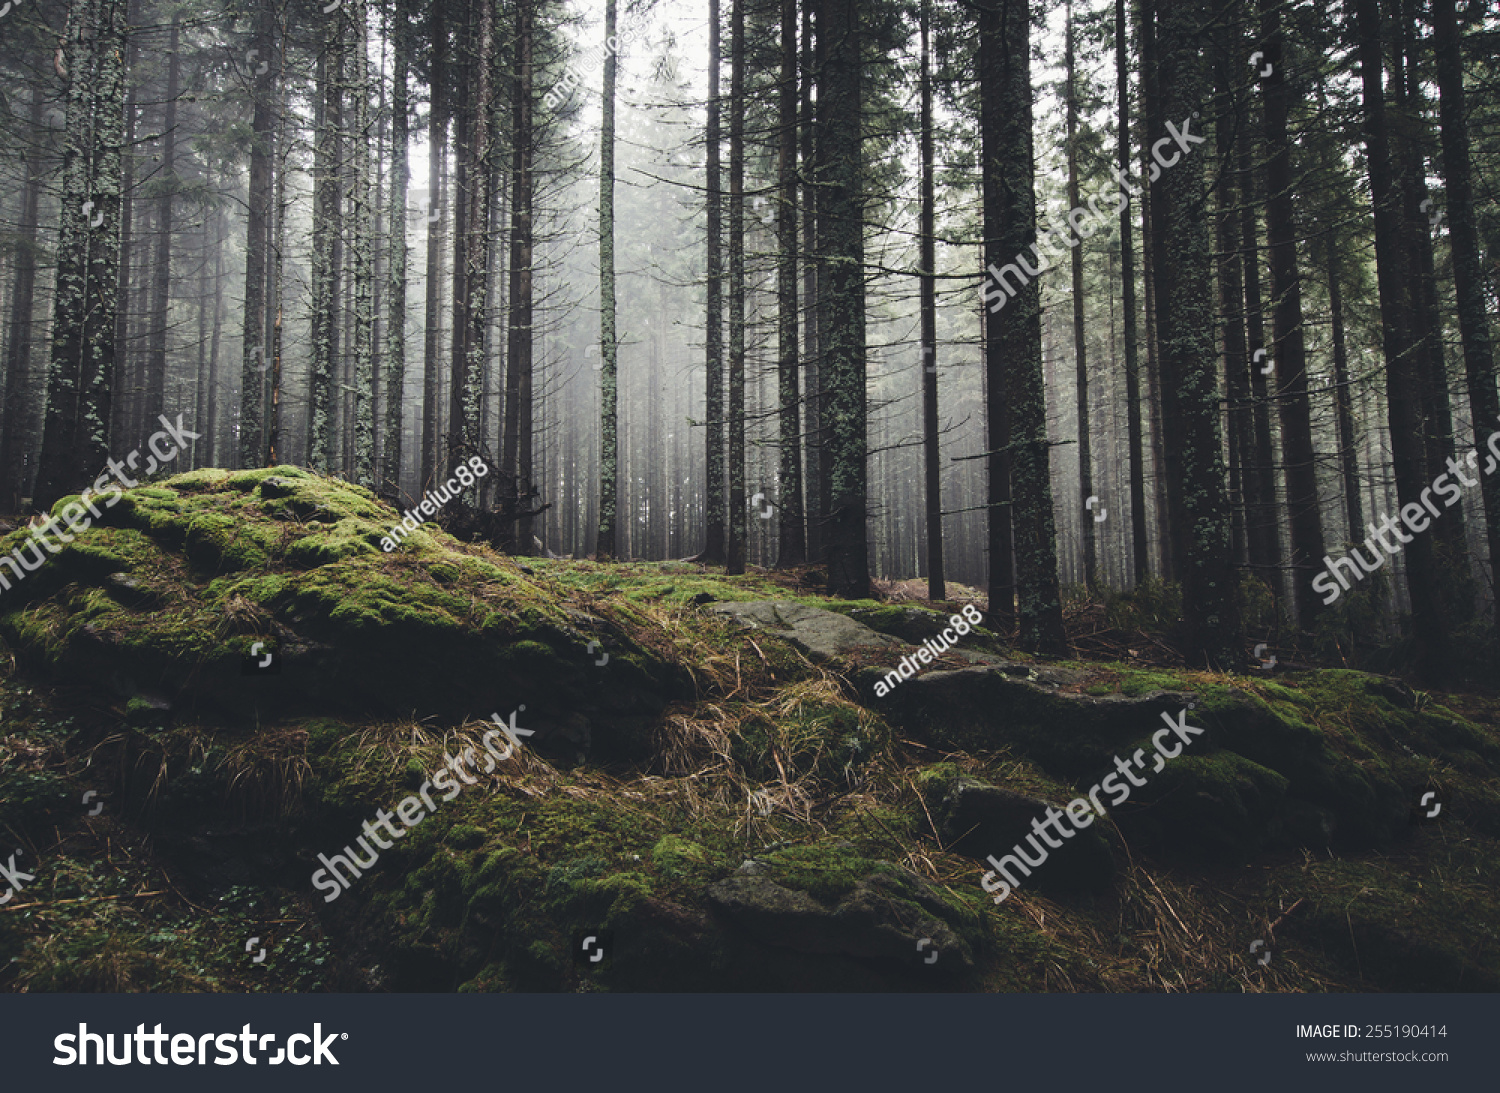 wilderness landscape forest with pine trees and moss on rocks #255190414